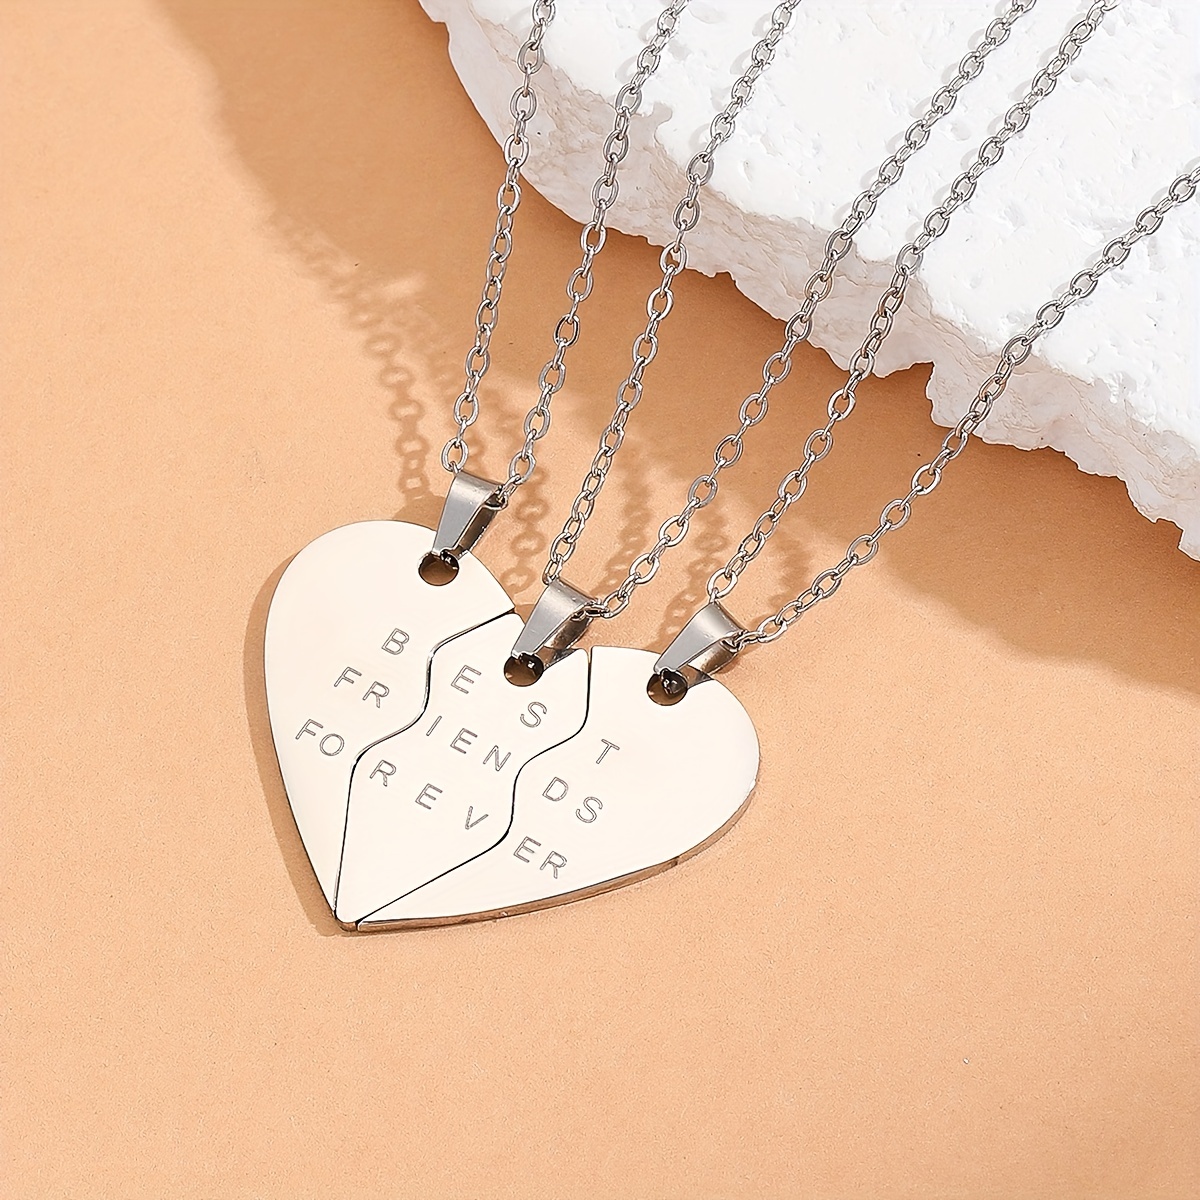 Stainless Steel Pendant Necklace Pack